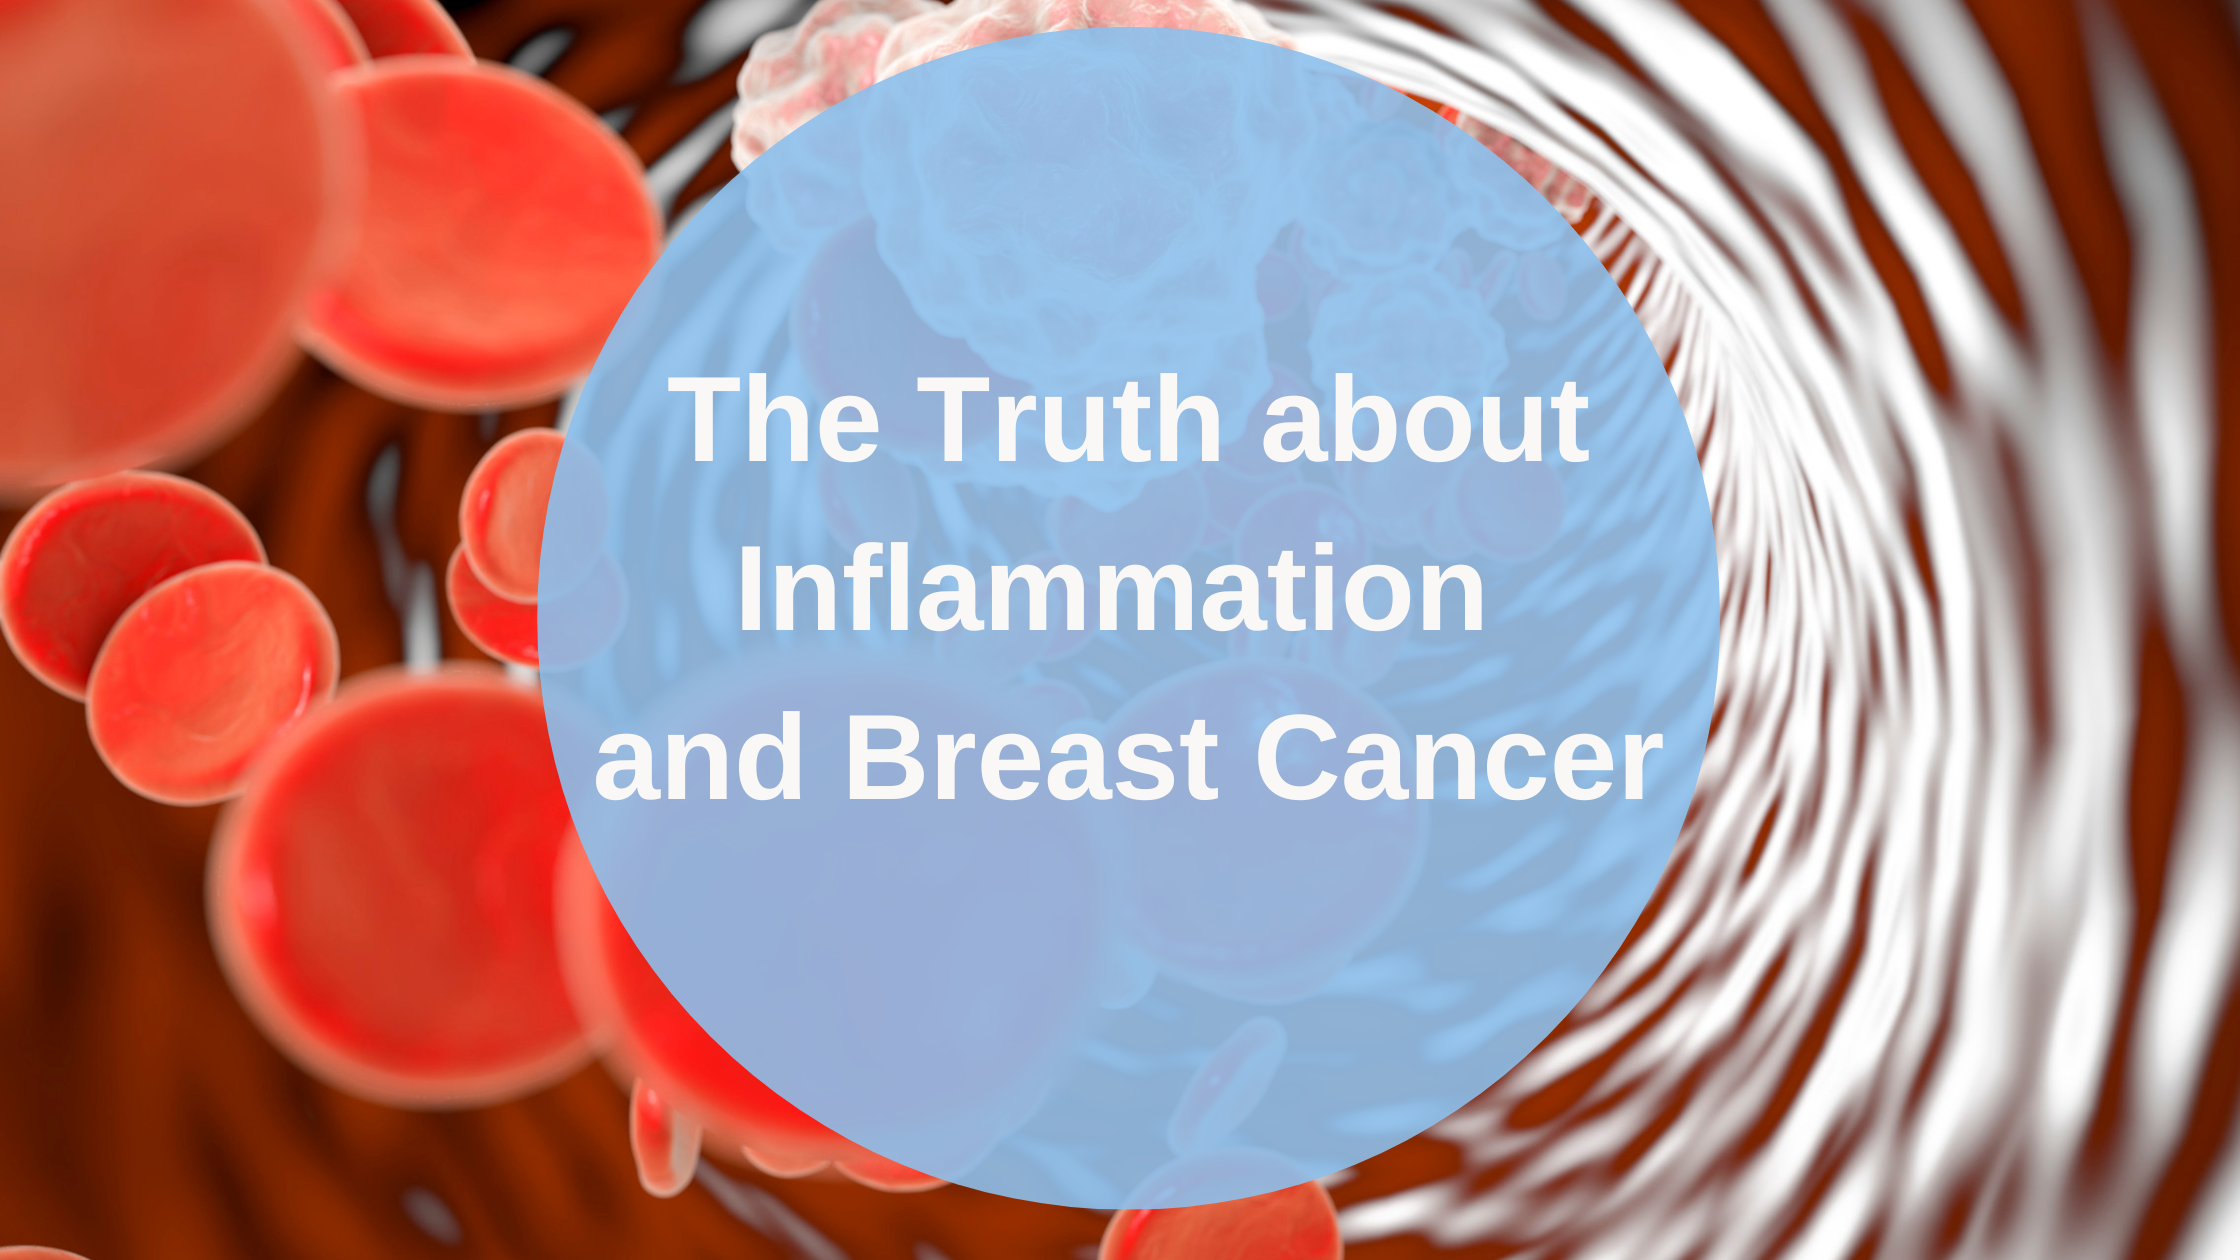 Inflammation and breast cancer